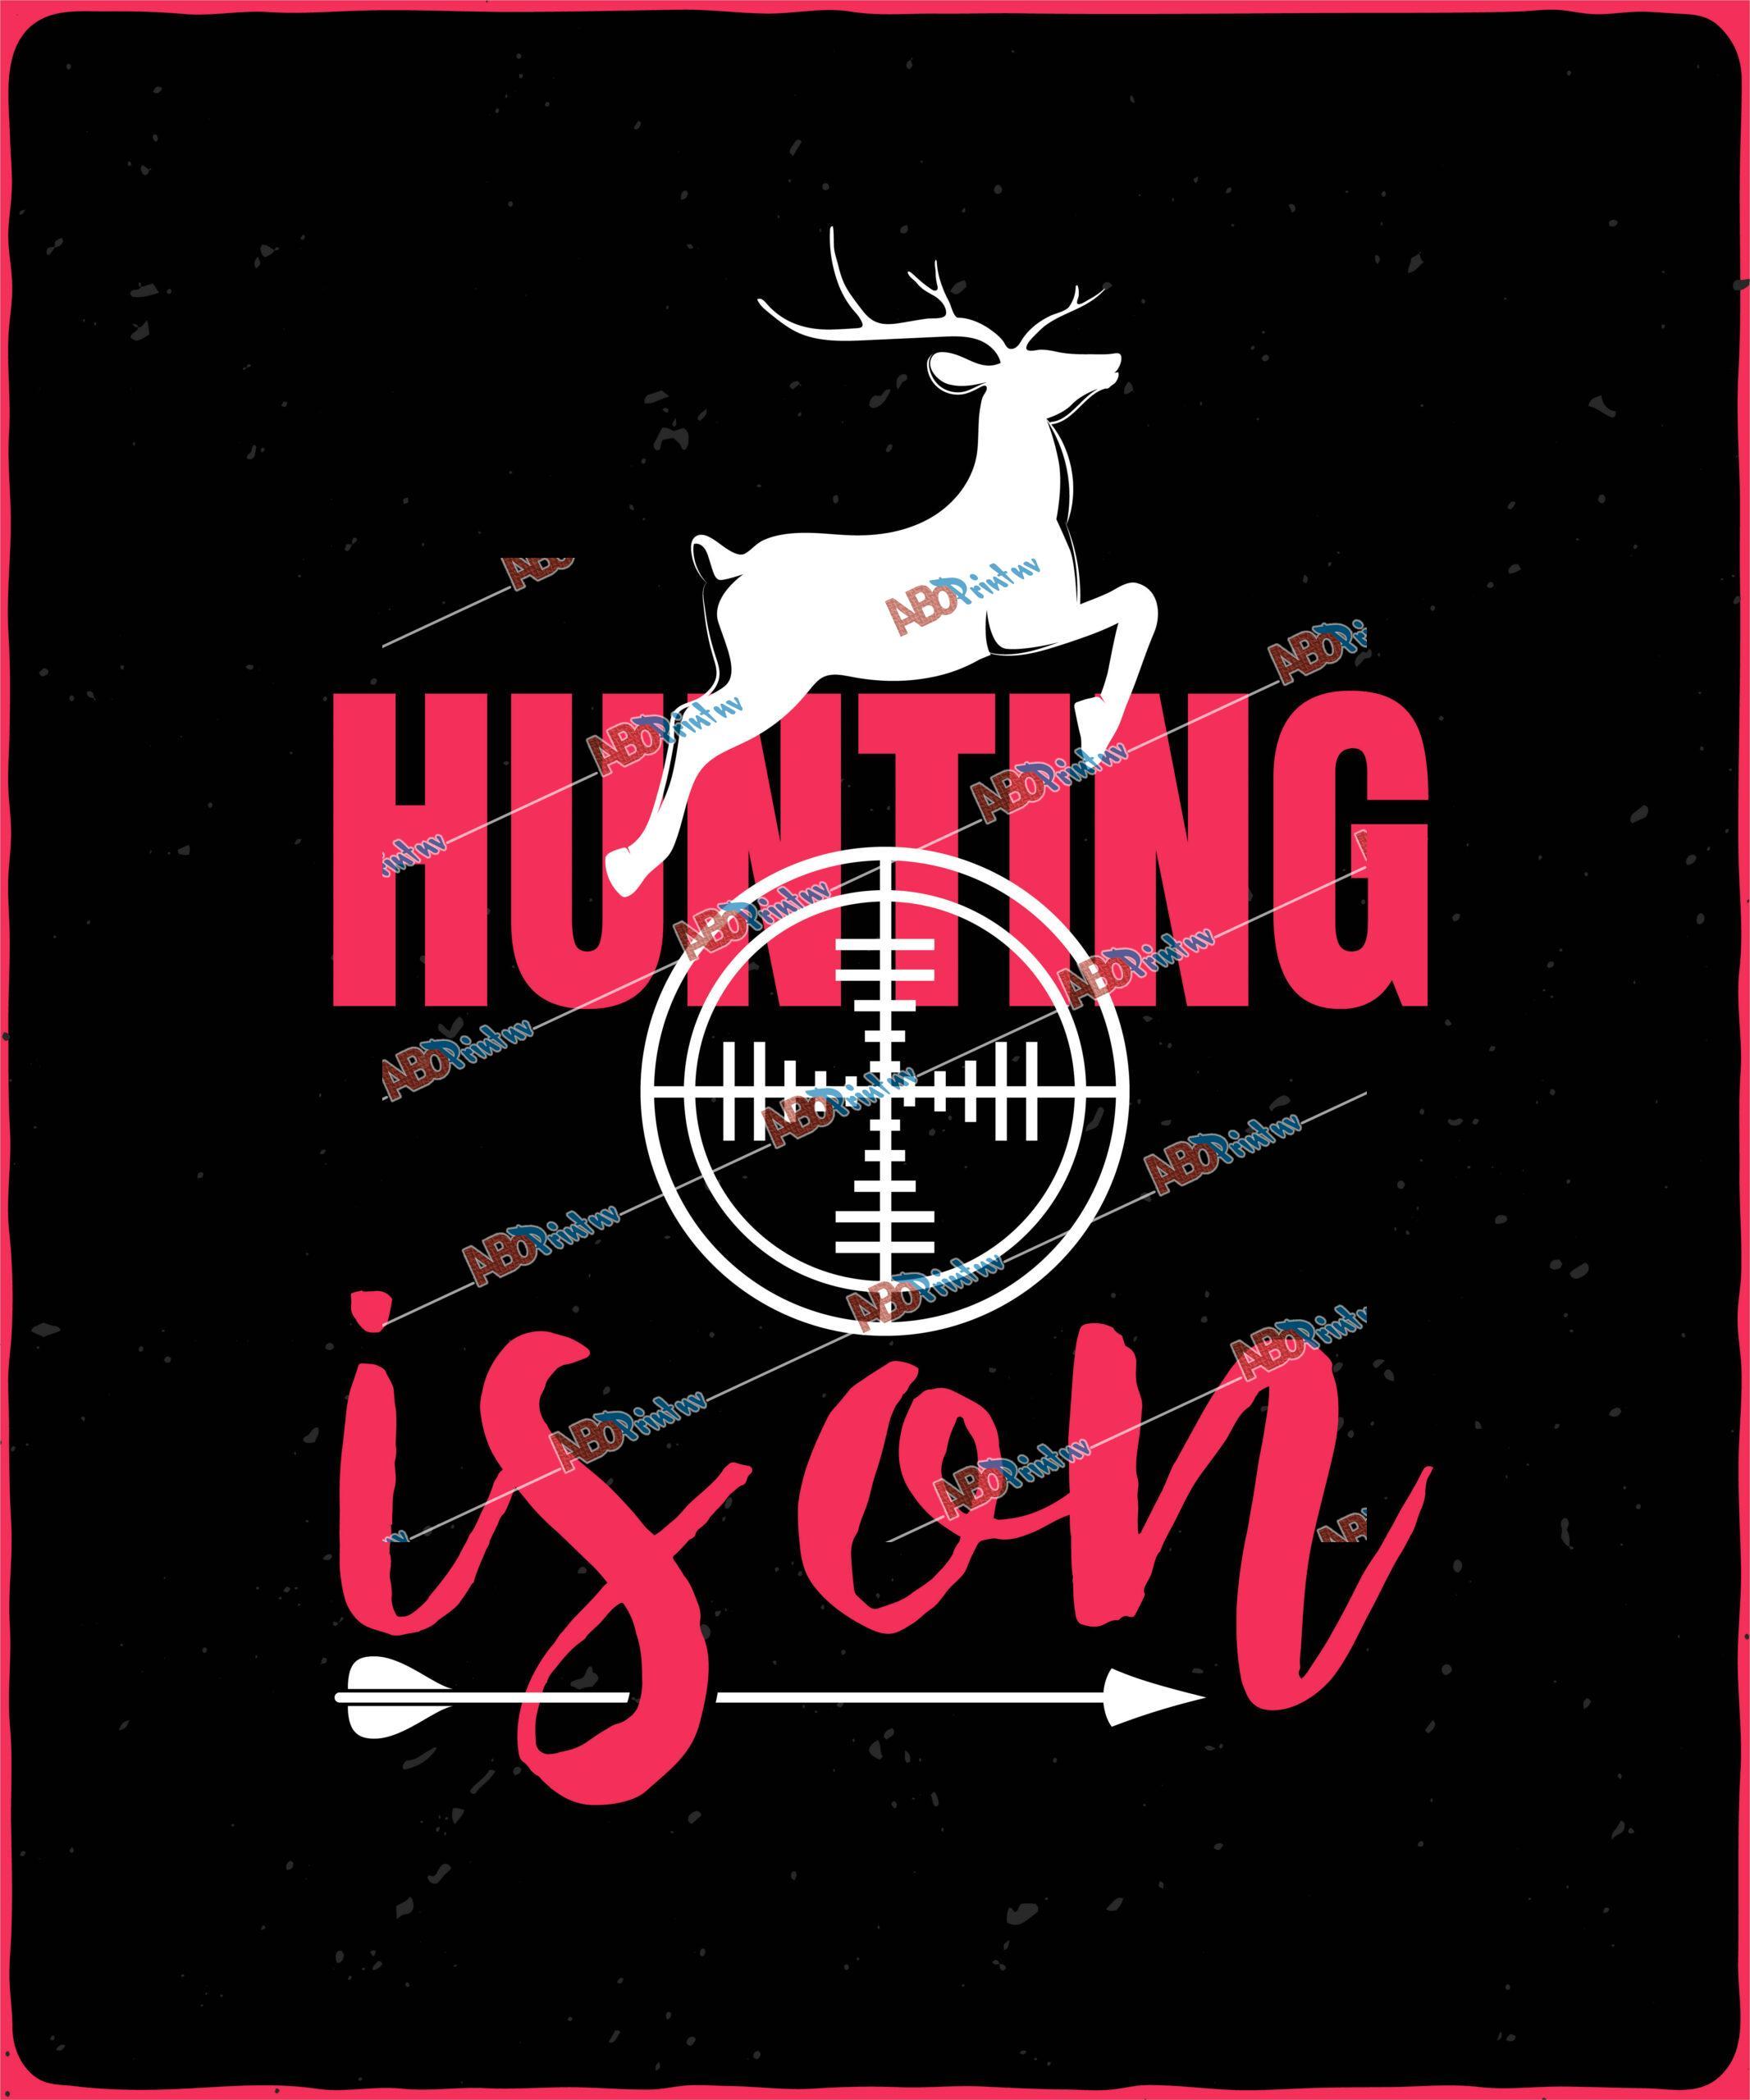 Hunting is on